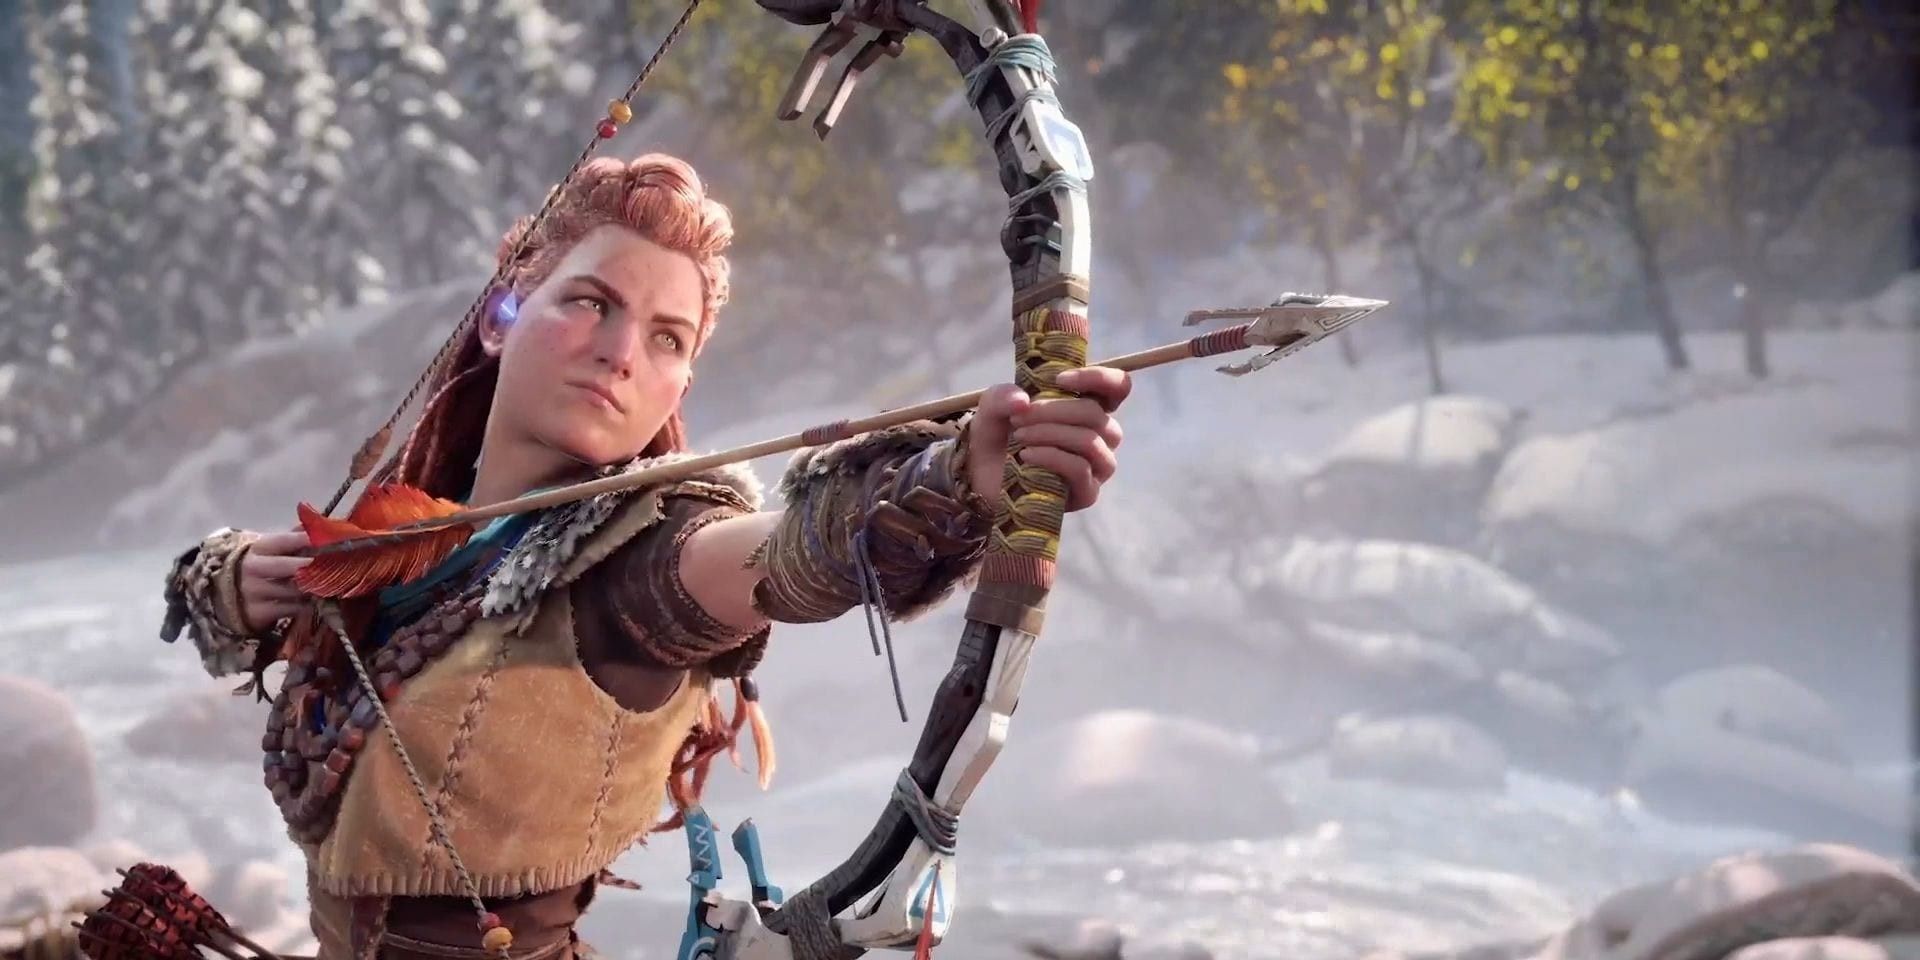 Aloy aiming her bow and arrow in Horizon Forbidden West.